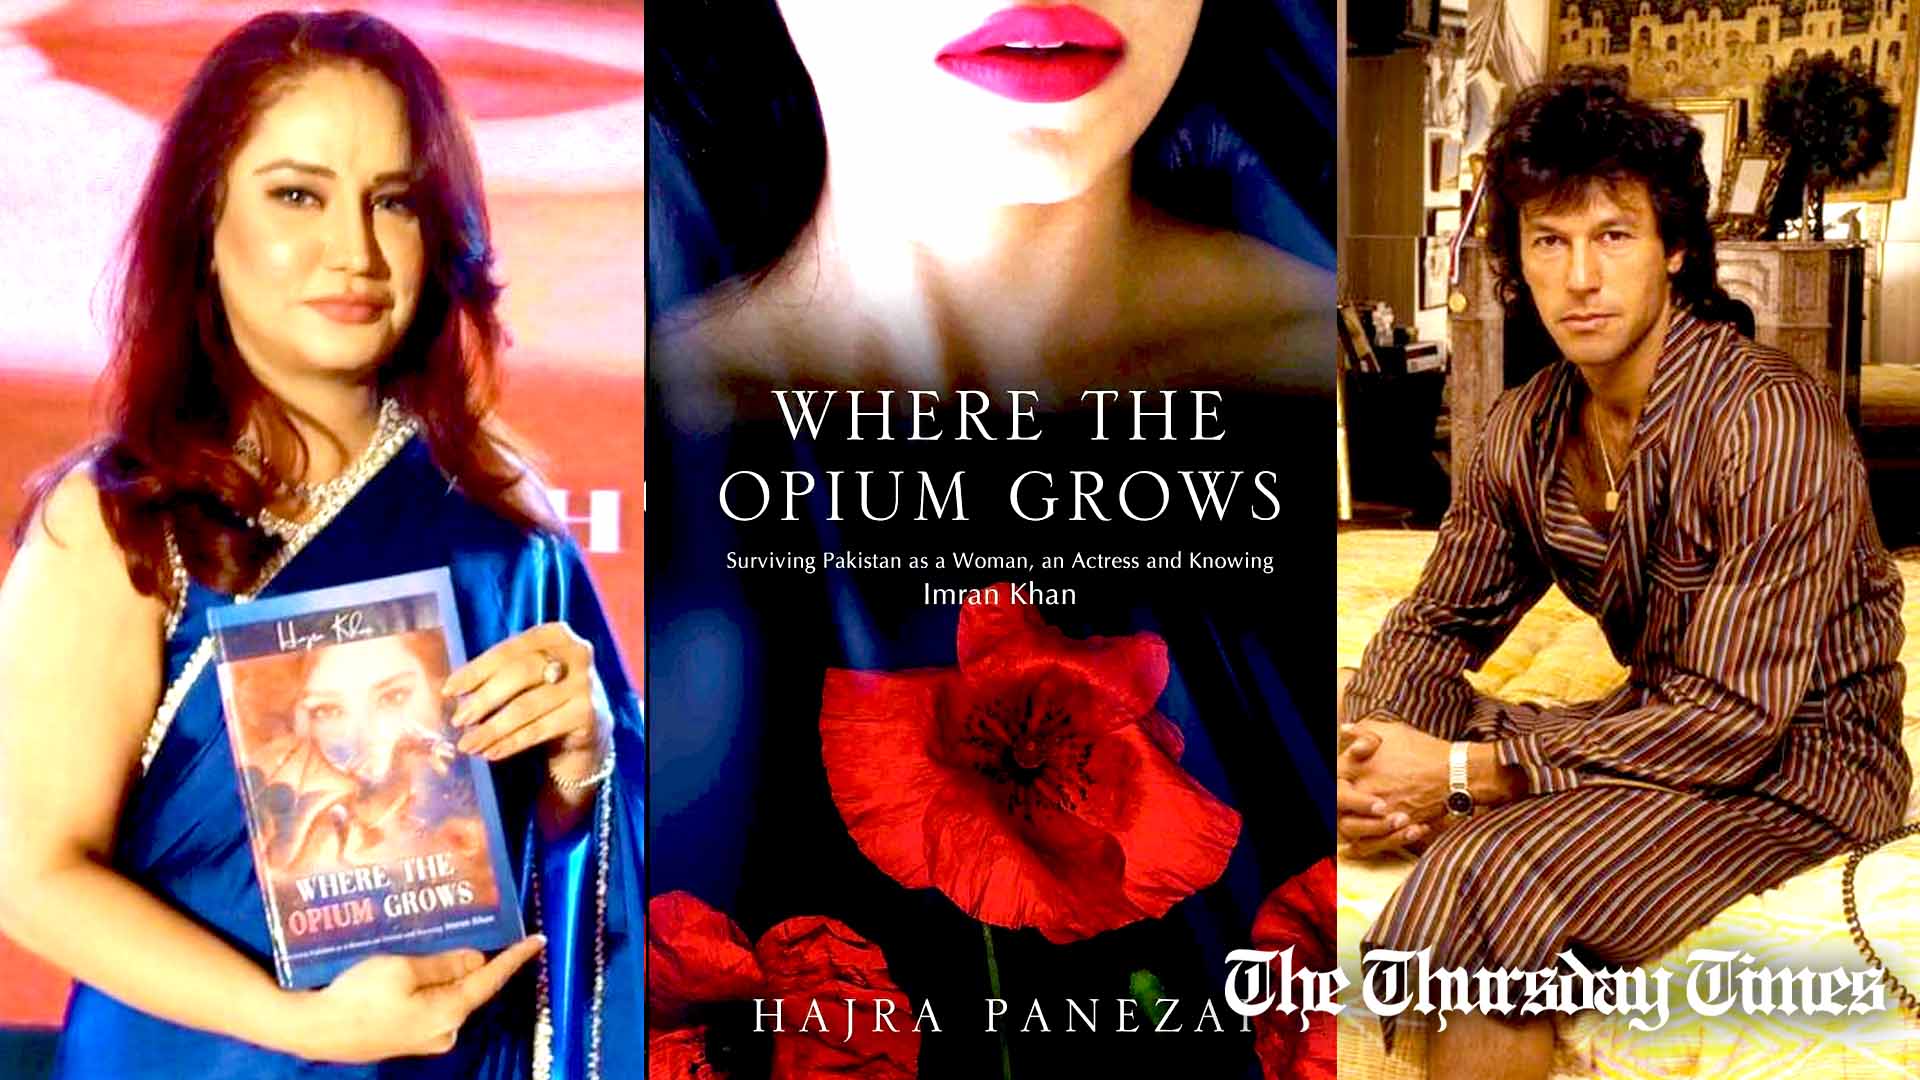 A combined file photo is shown of actress Hajra Khan, also known as Hajra Panezai (L), the cover of her new book, Where the Opium Grows (C) and PTI chairman and former cricketer Imran Khan as a bachelor in the 1990s (R). — FILE/THE THURSDAY TIMES